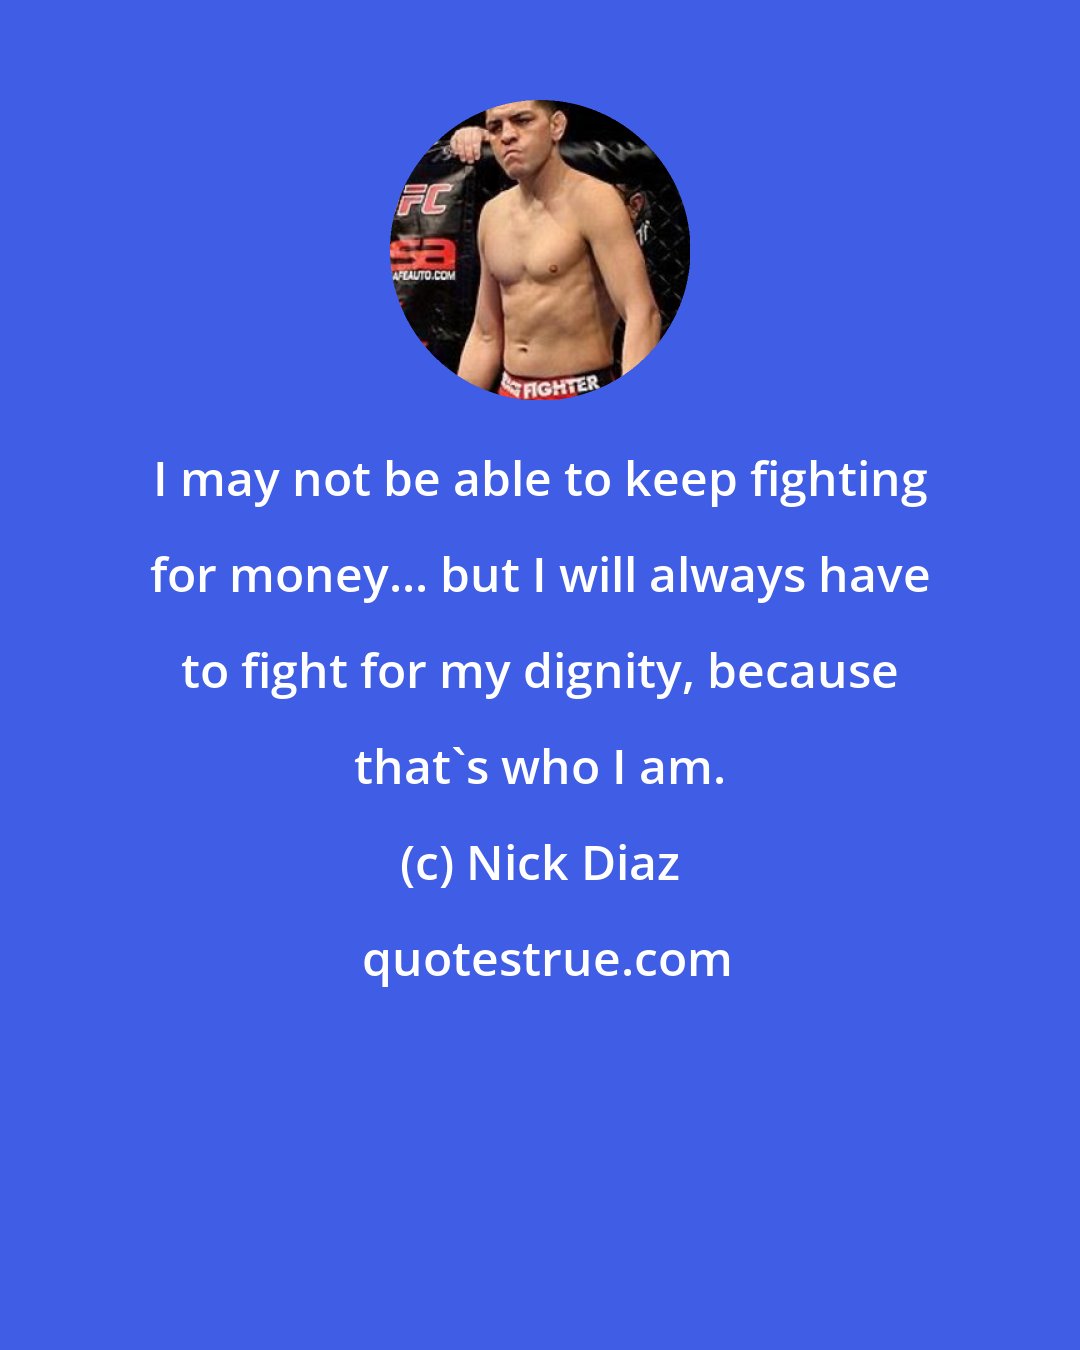 Nick Diaz: I may not be able to keep fighting for money... but I will always have to fight for my dignity, because that's who I am.